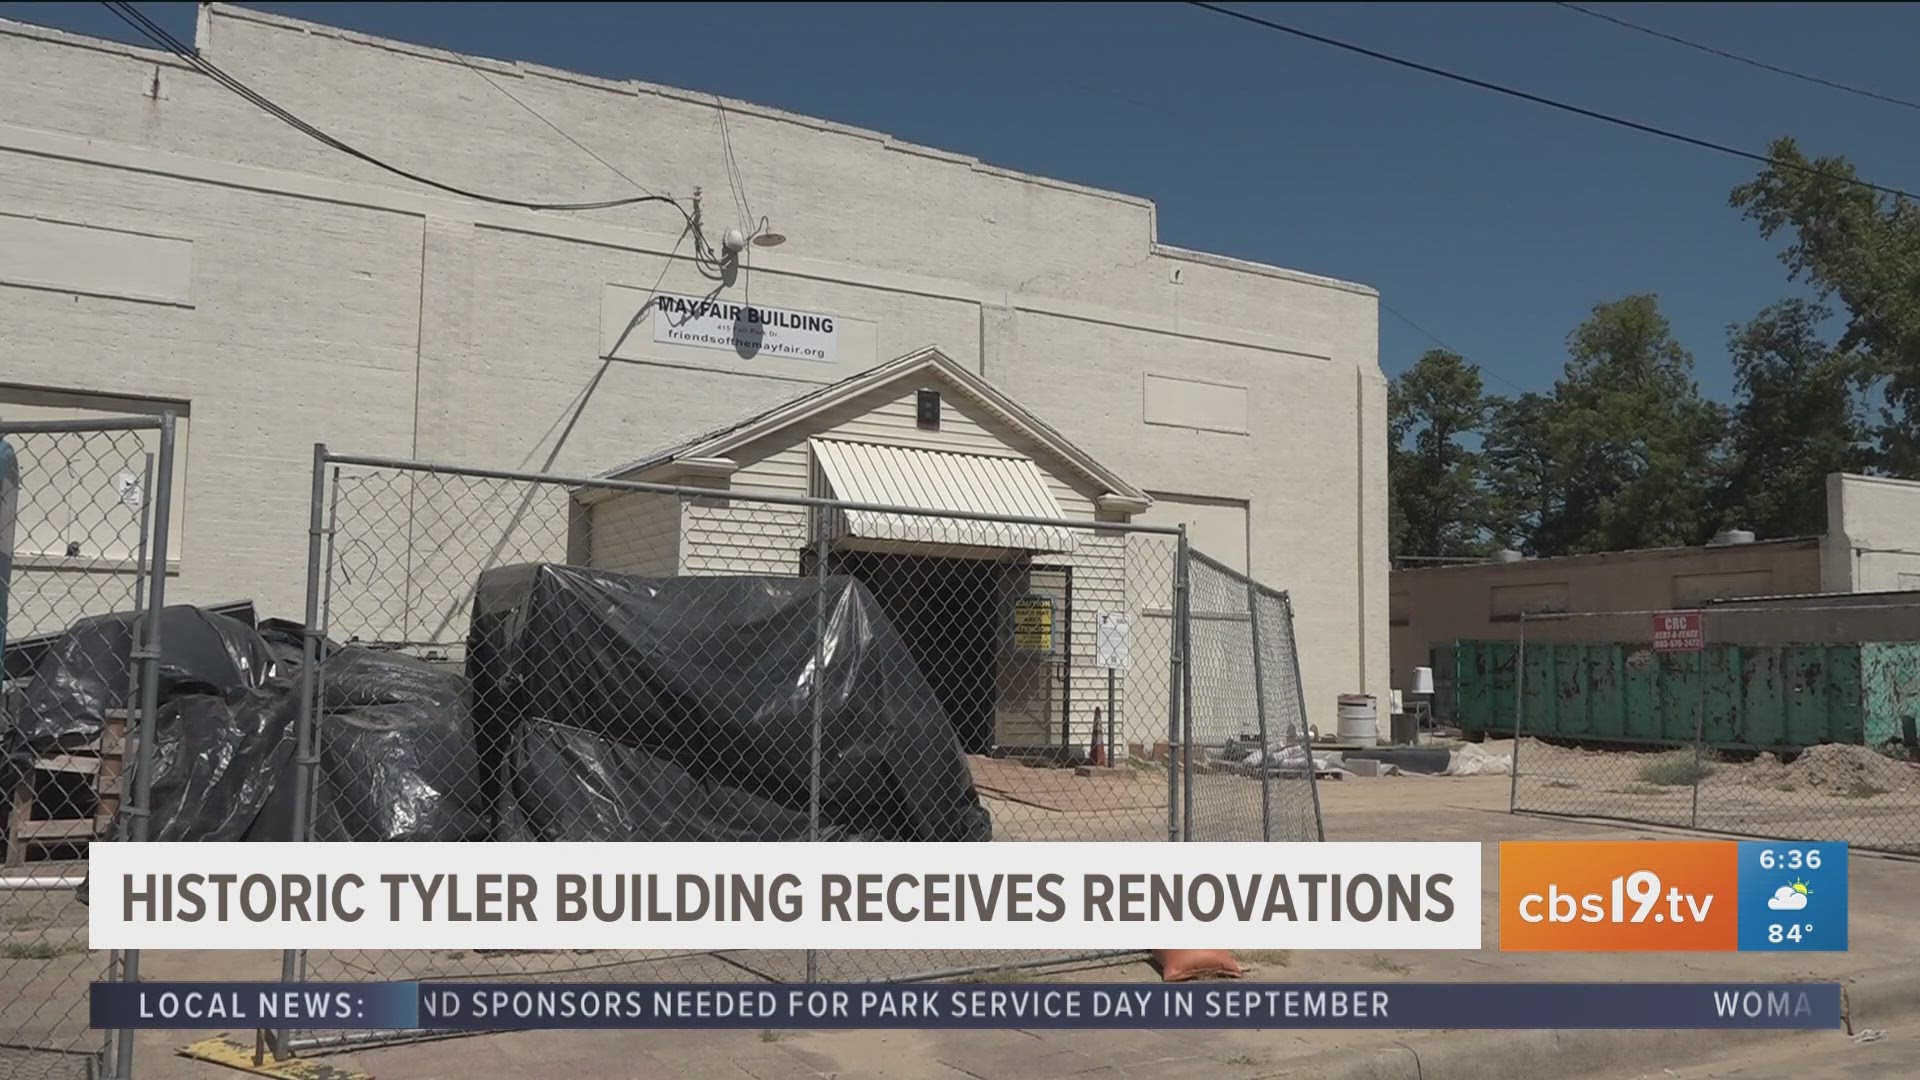 City budget aims to fund completion of renovations at Tyler's historic Mayfair Building